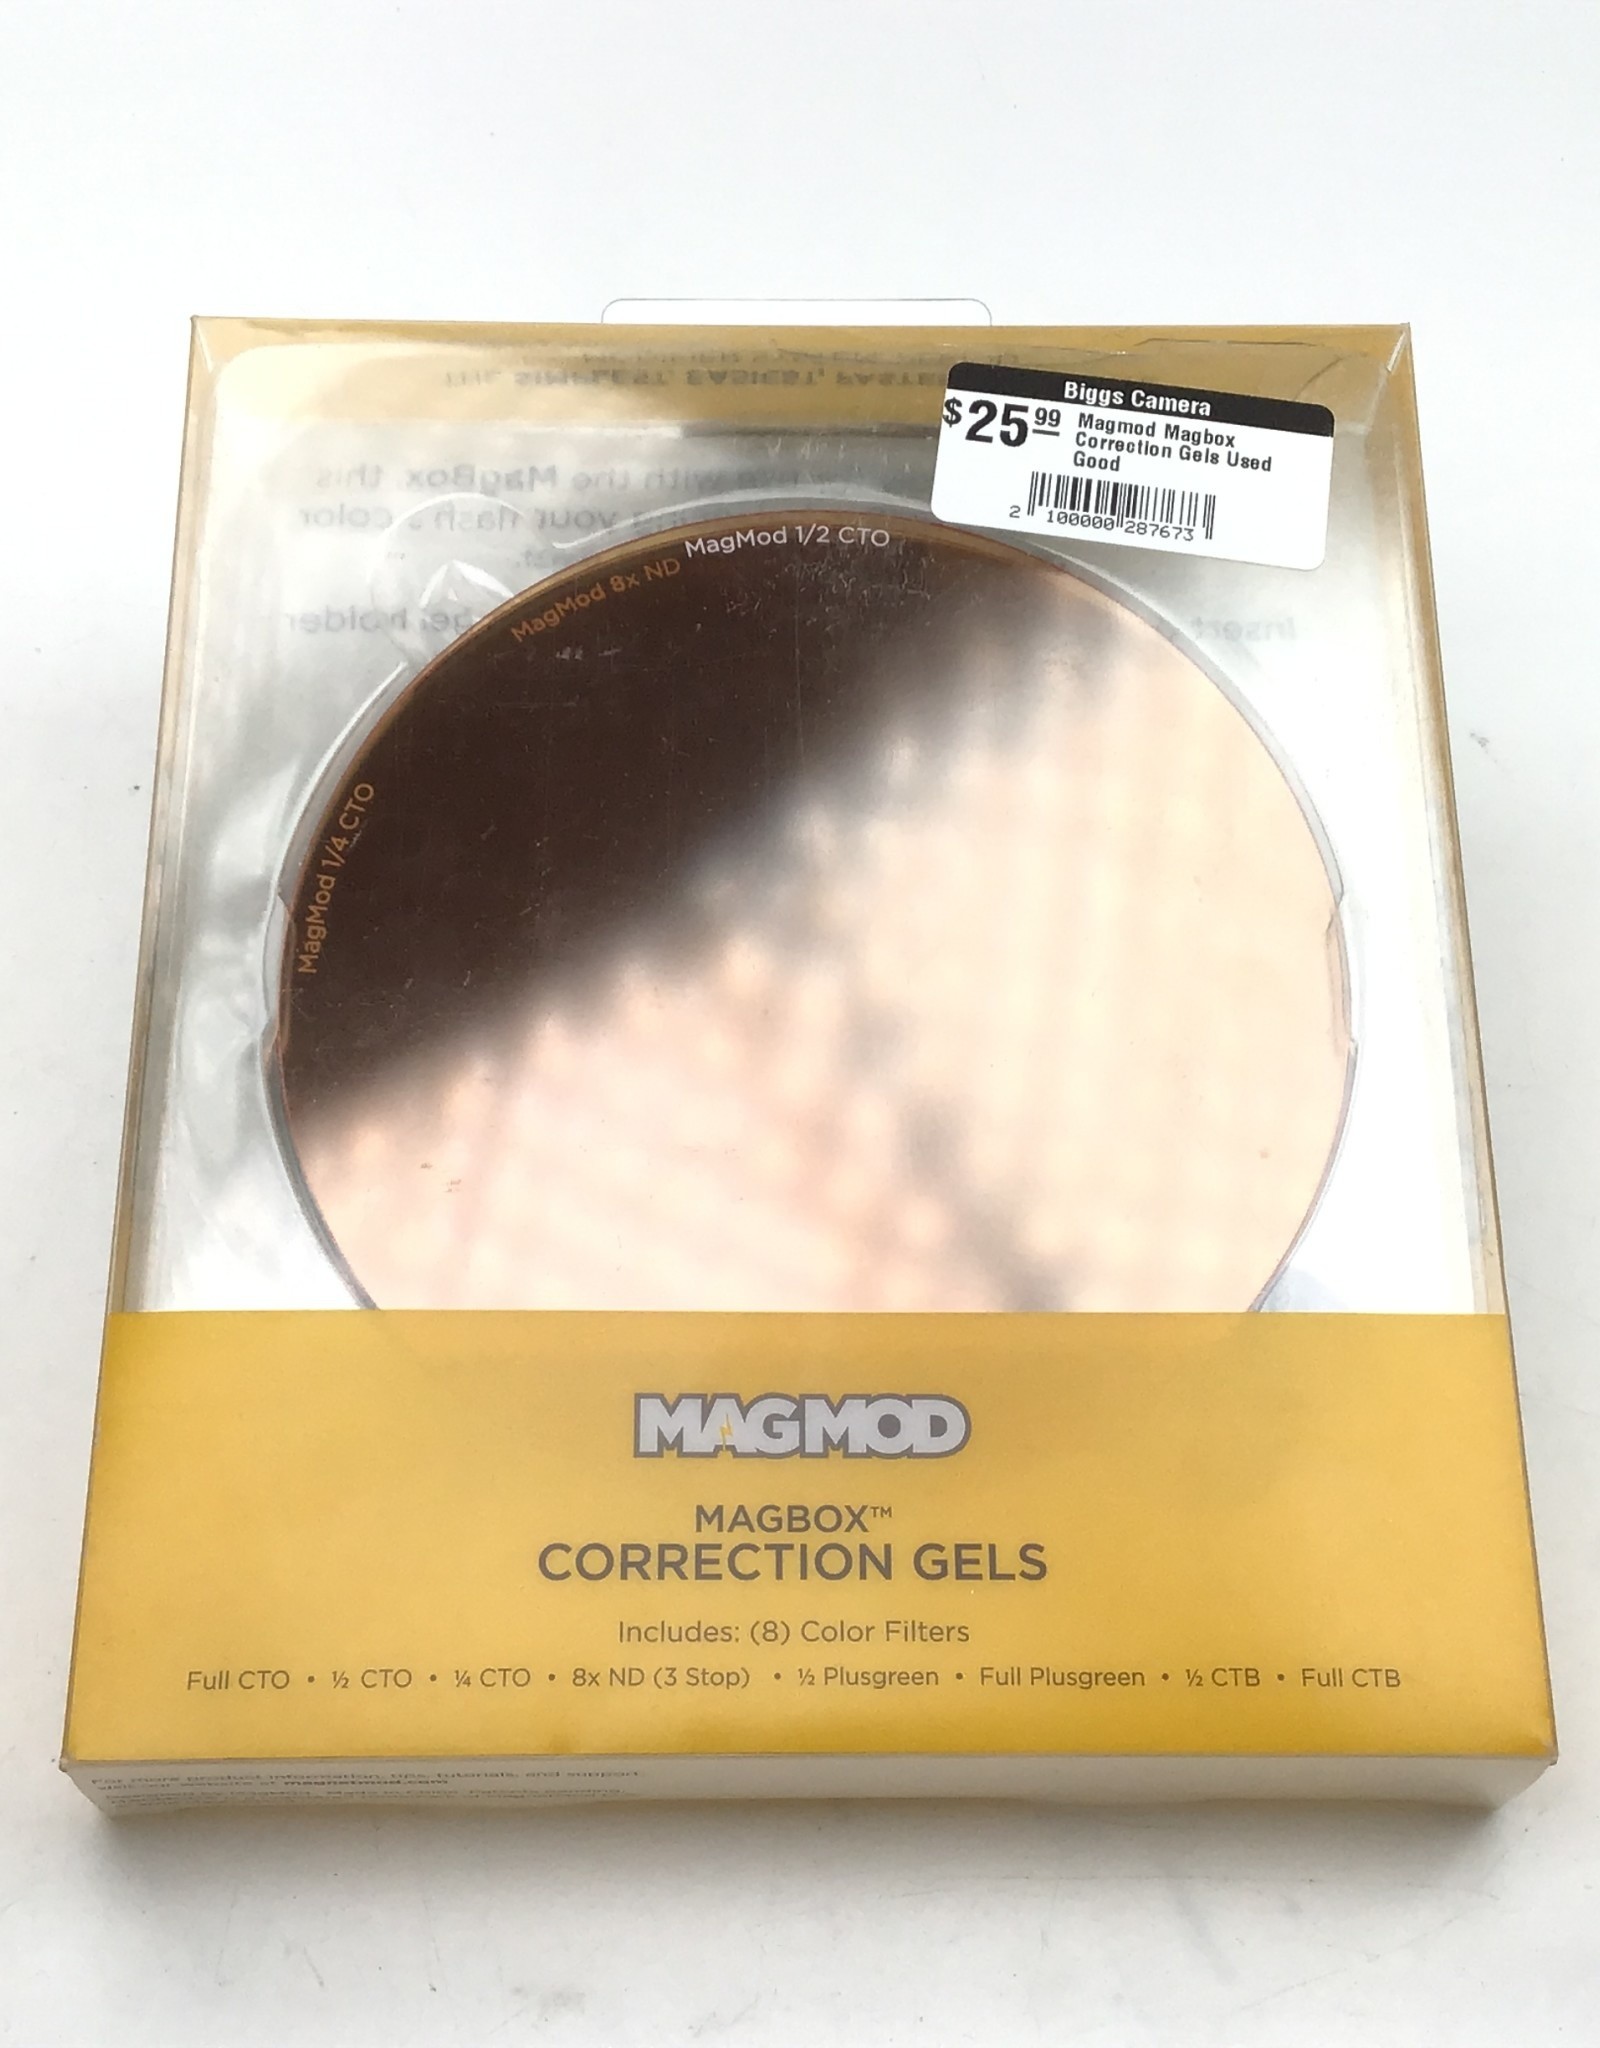 Magmod Magbox Correction Gels Used Good